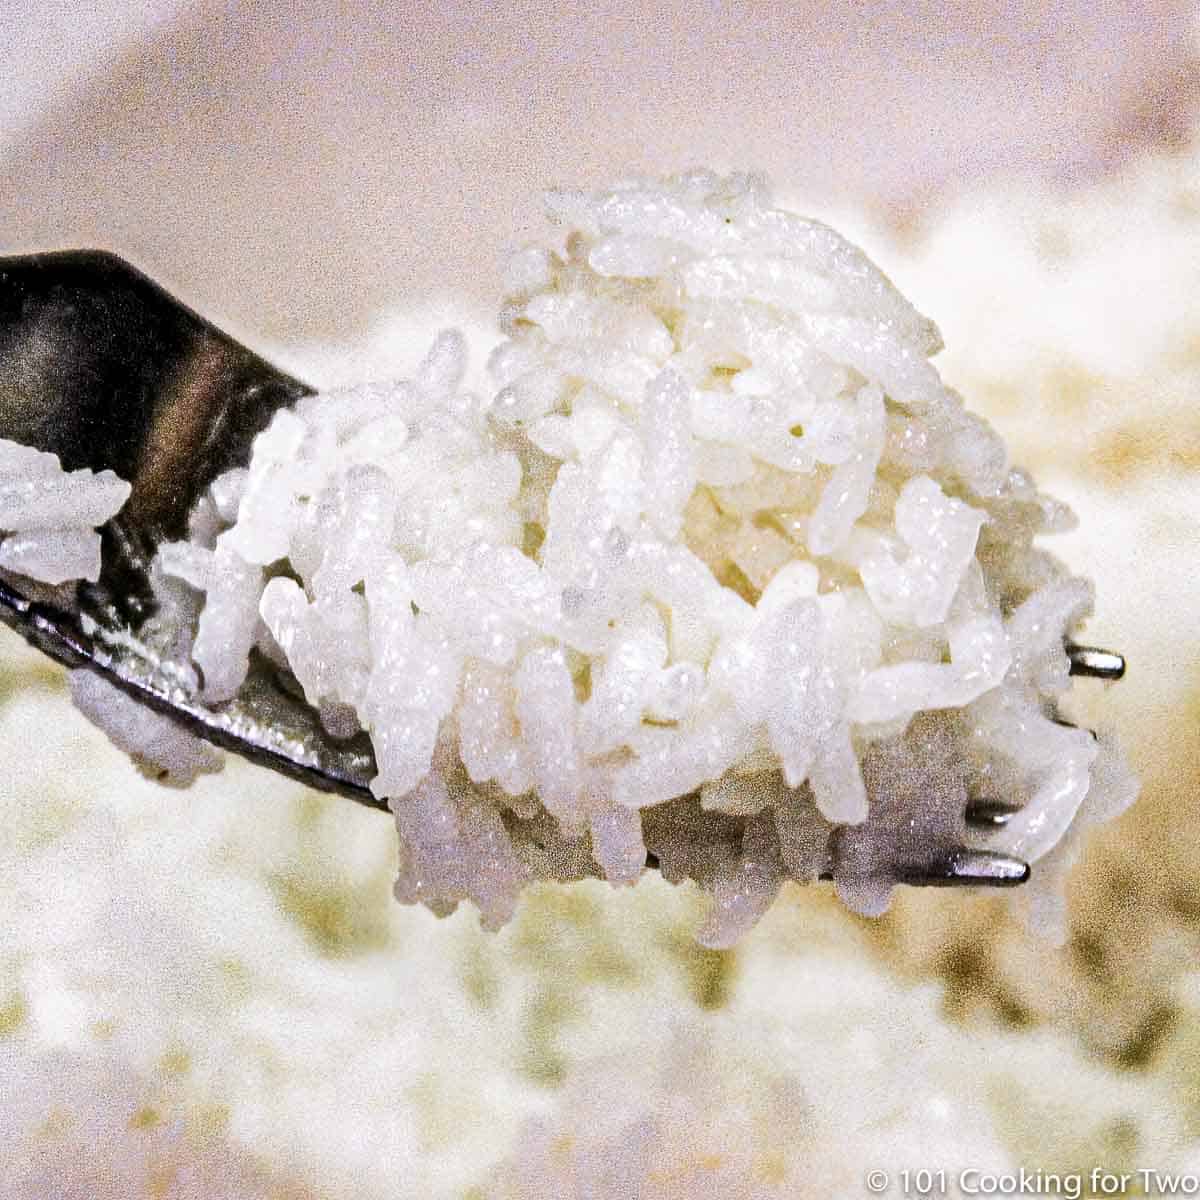 How To Cook Rice In The Oven 101 Cooking For Two,Vinegar In Laundry How Much